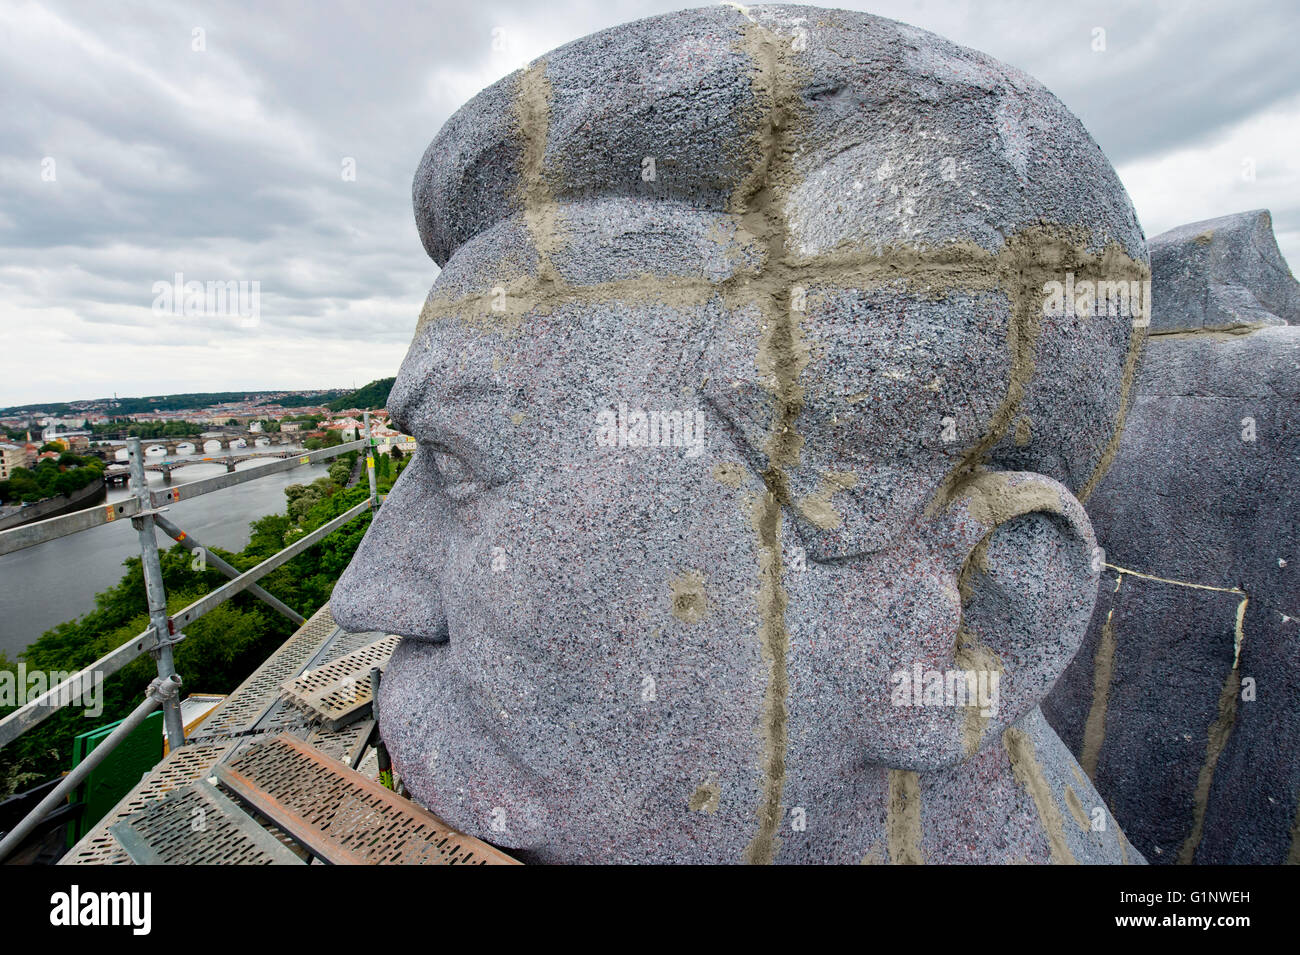 Prague, Czech Republic. 17th May, 2016. A dummy giant sculpture, replica of the Prague monument to Joseph Stalin that was the largest of its kind in Europe in the 1950s, is being built in its original place these days by film makers focusing on the life of its author, sculptor Otakar Svec, in Prague, Czech Republic, May 17, 2016. © Vit Simanek/CTK Photo/Alamy Live News Stock Photo